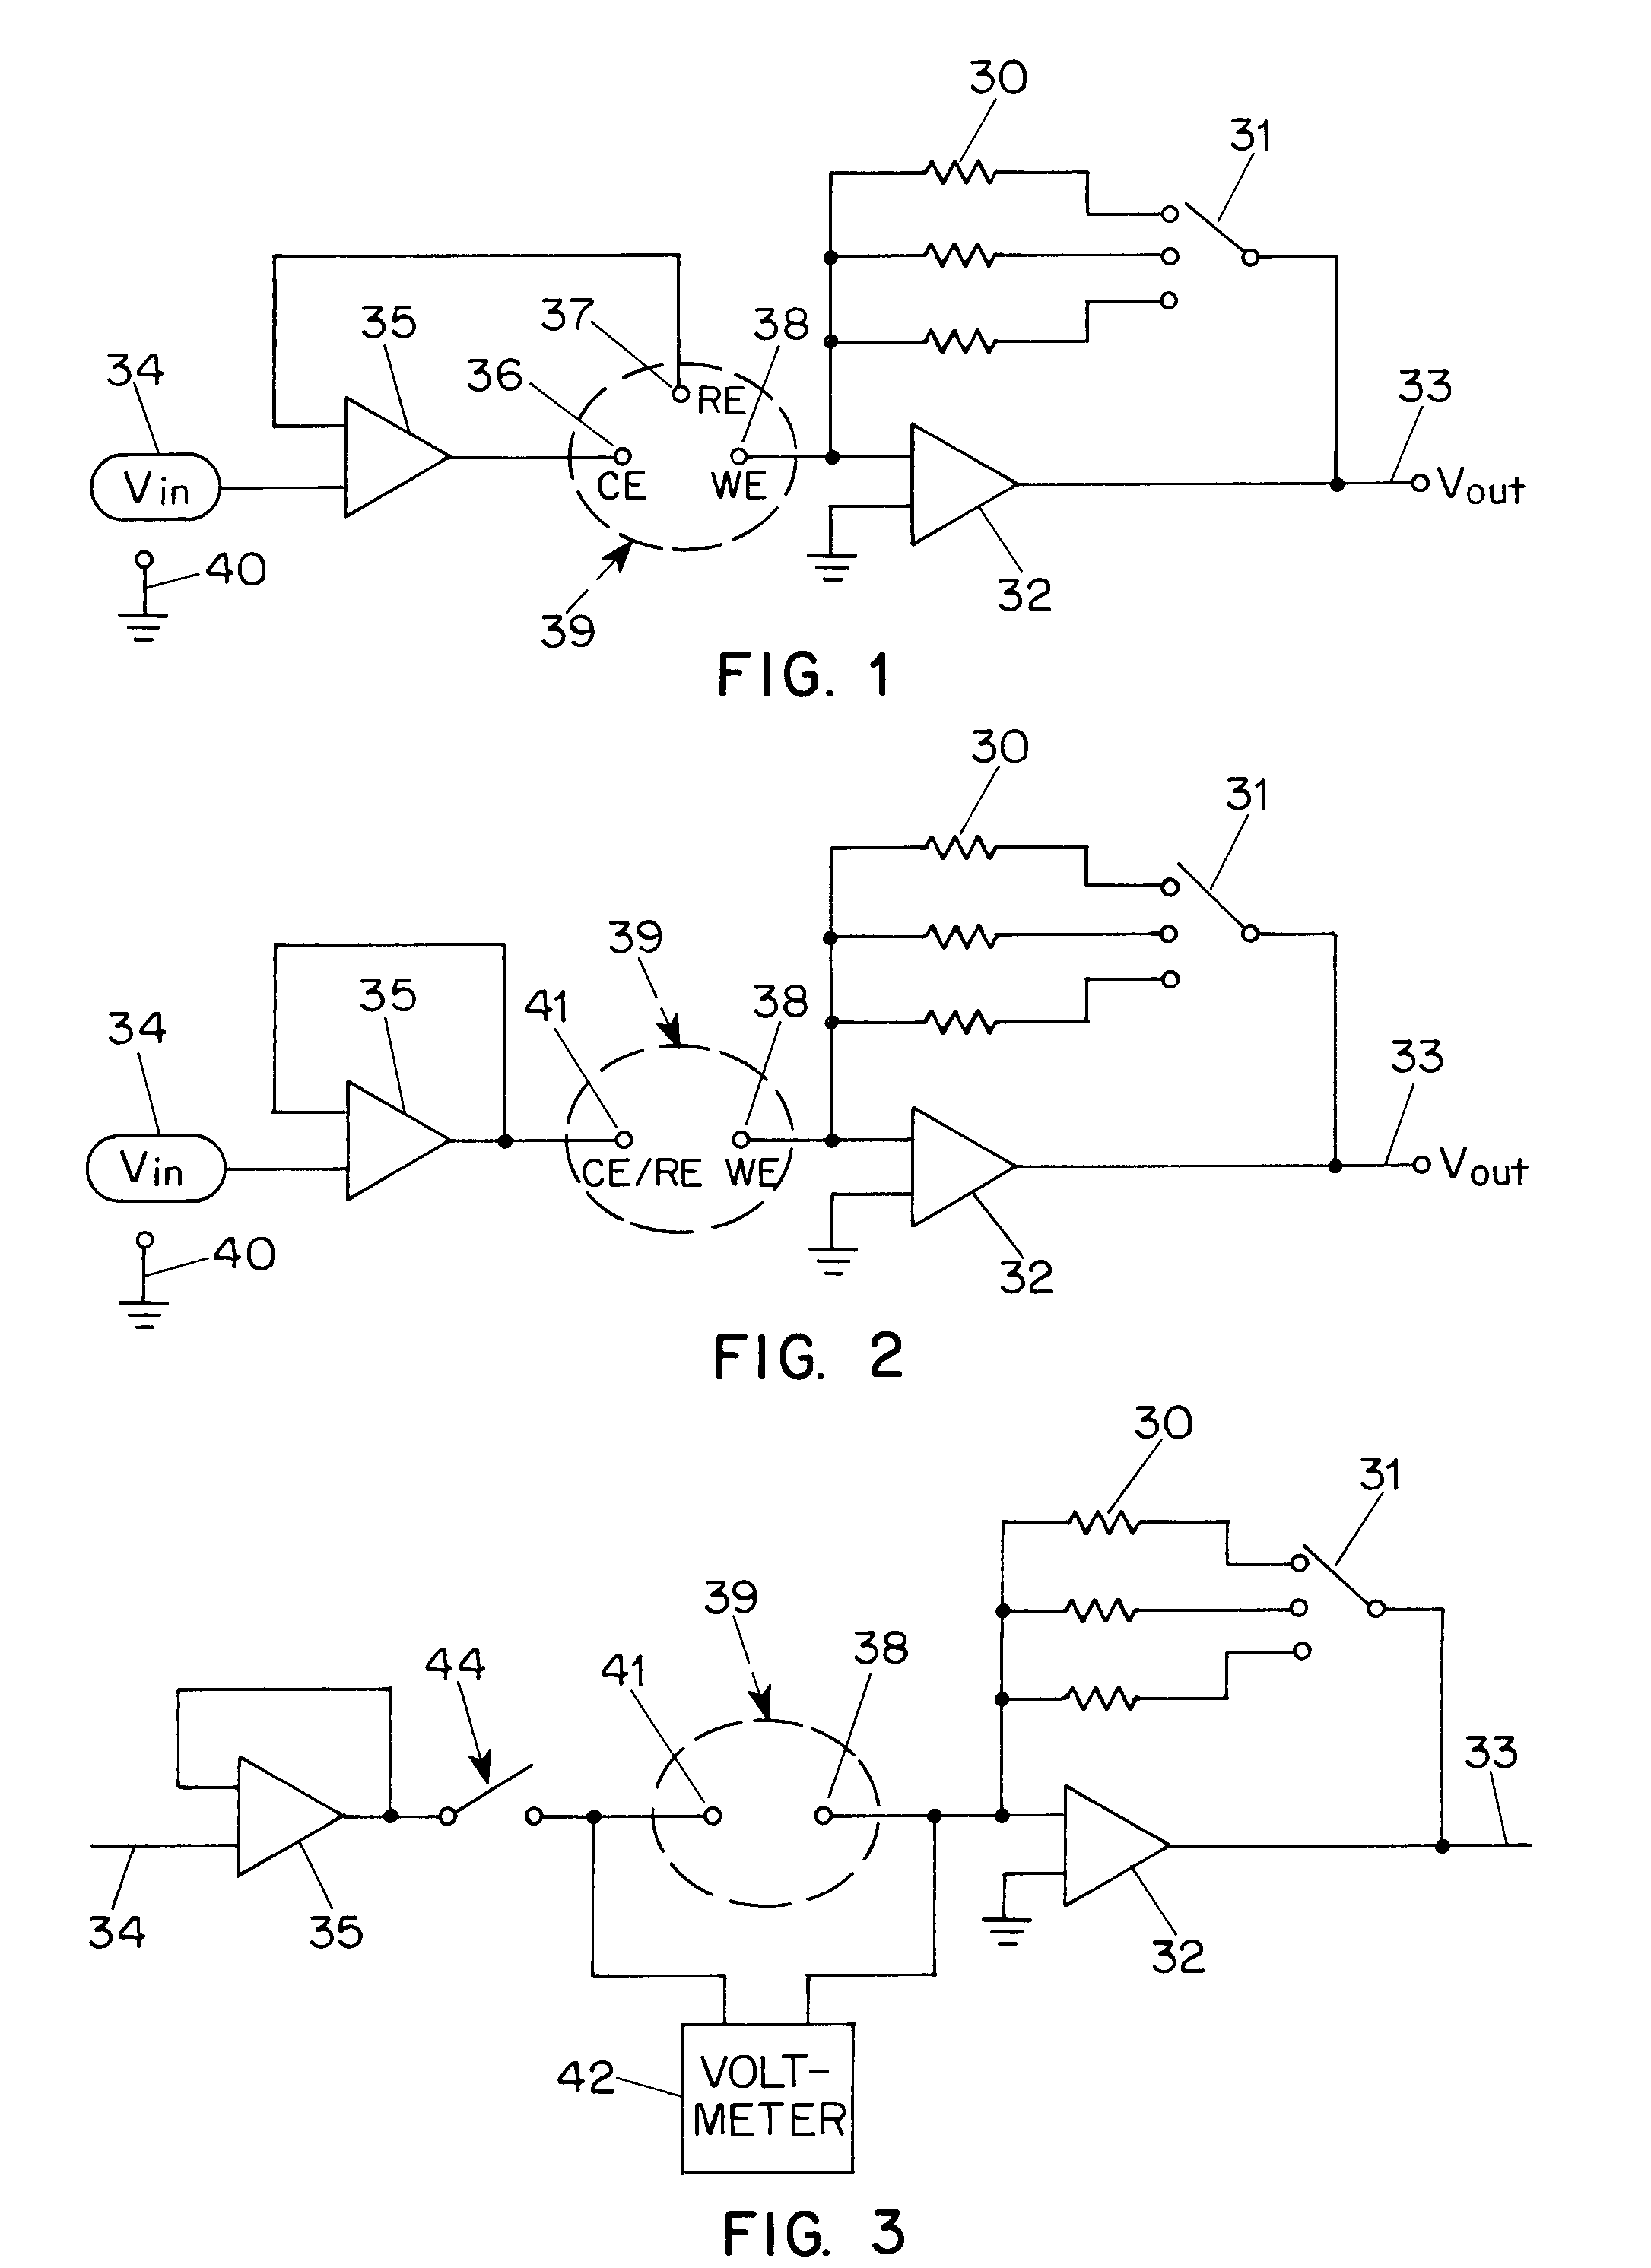 Measuring device and methods for use therewith